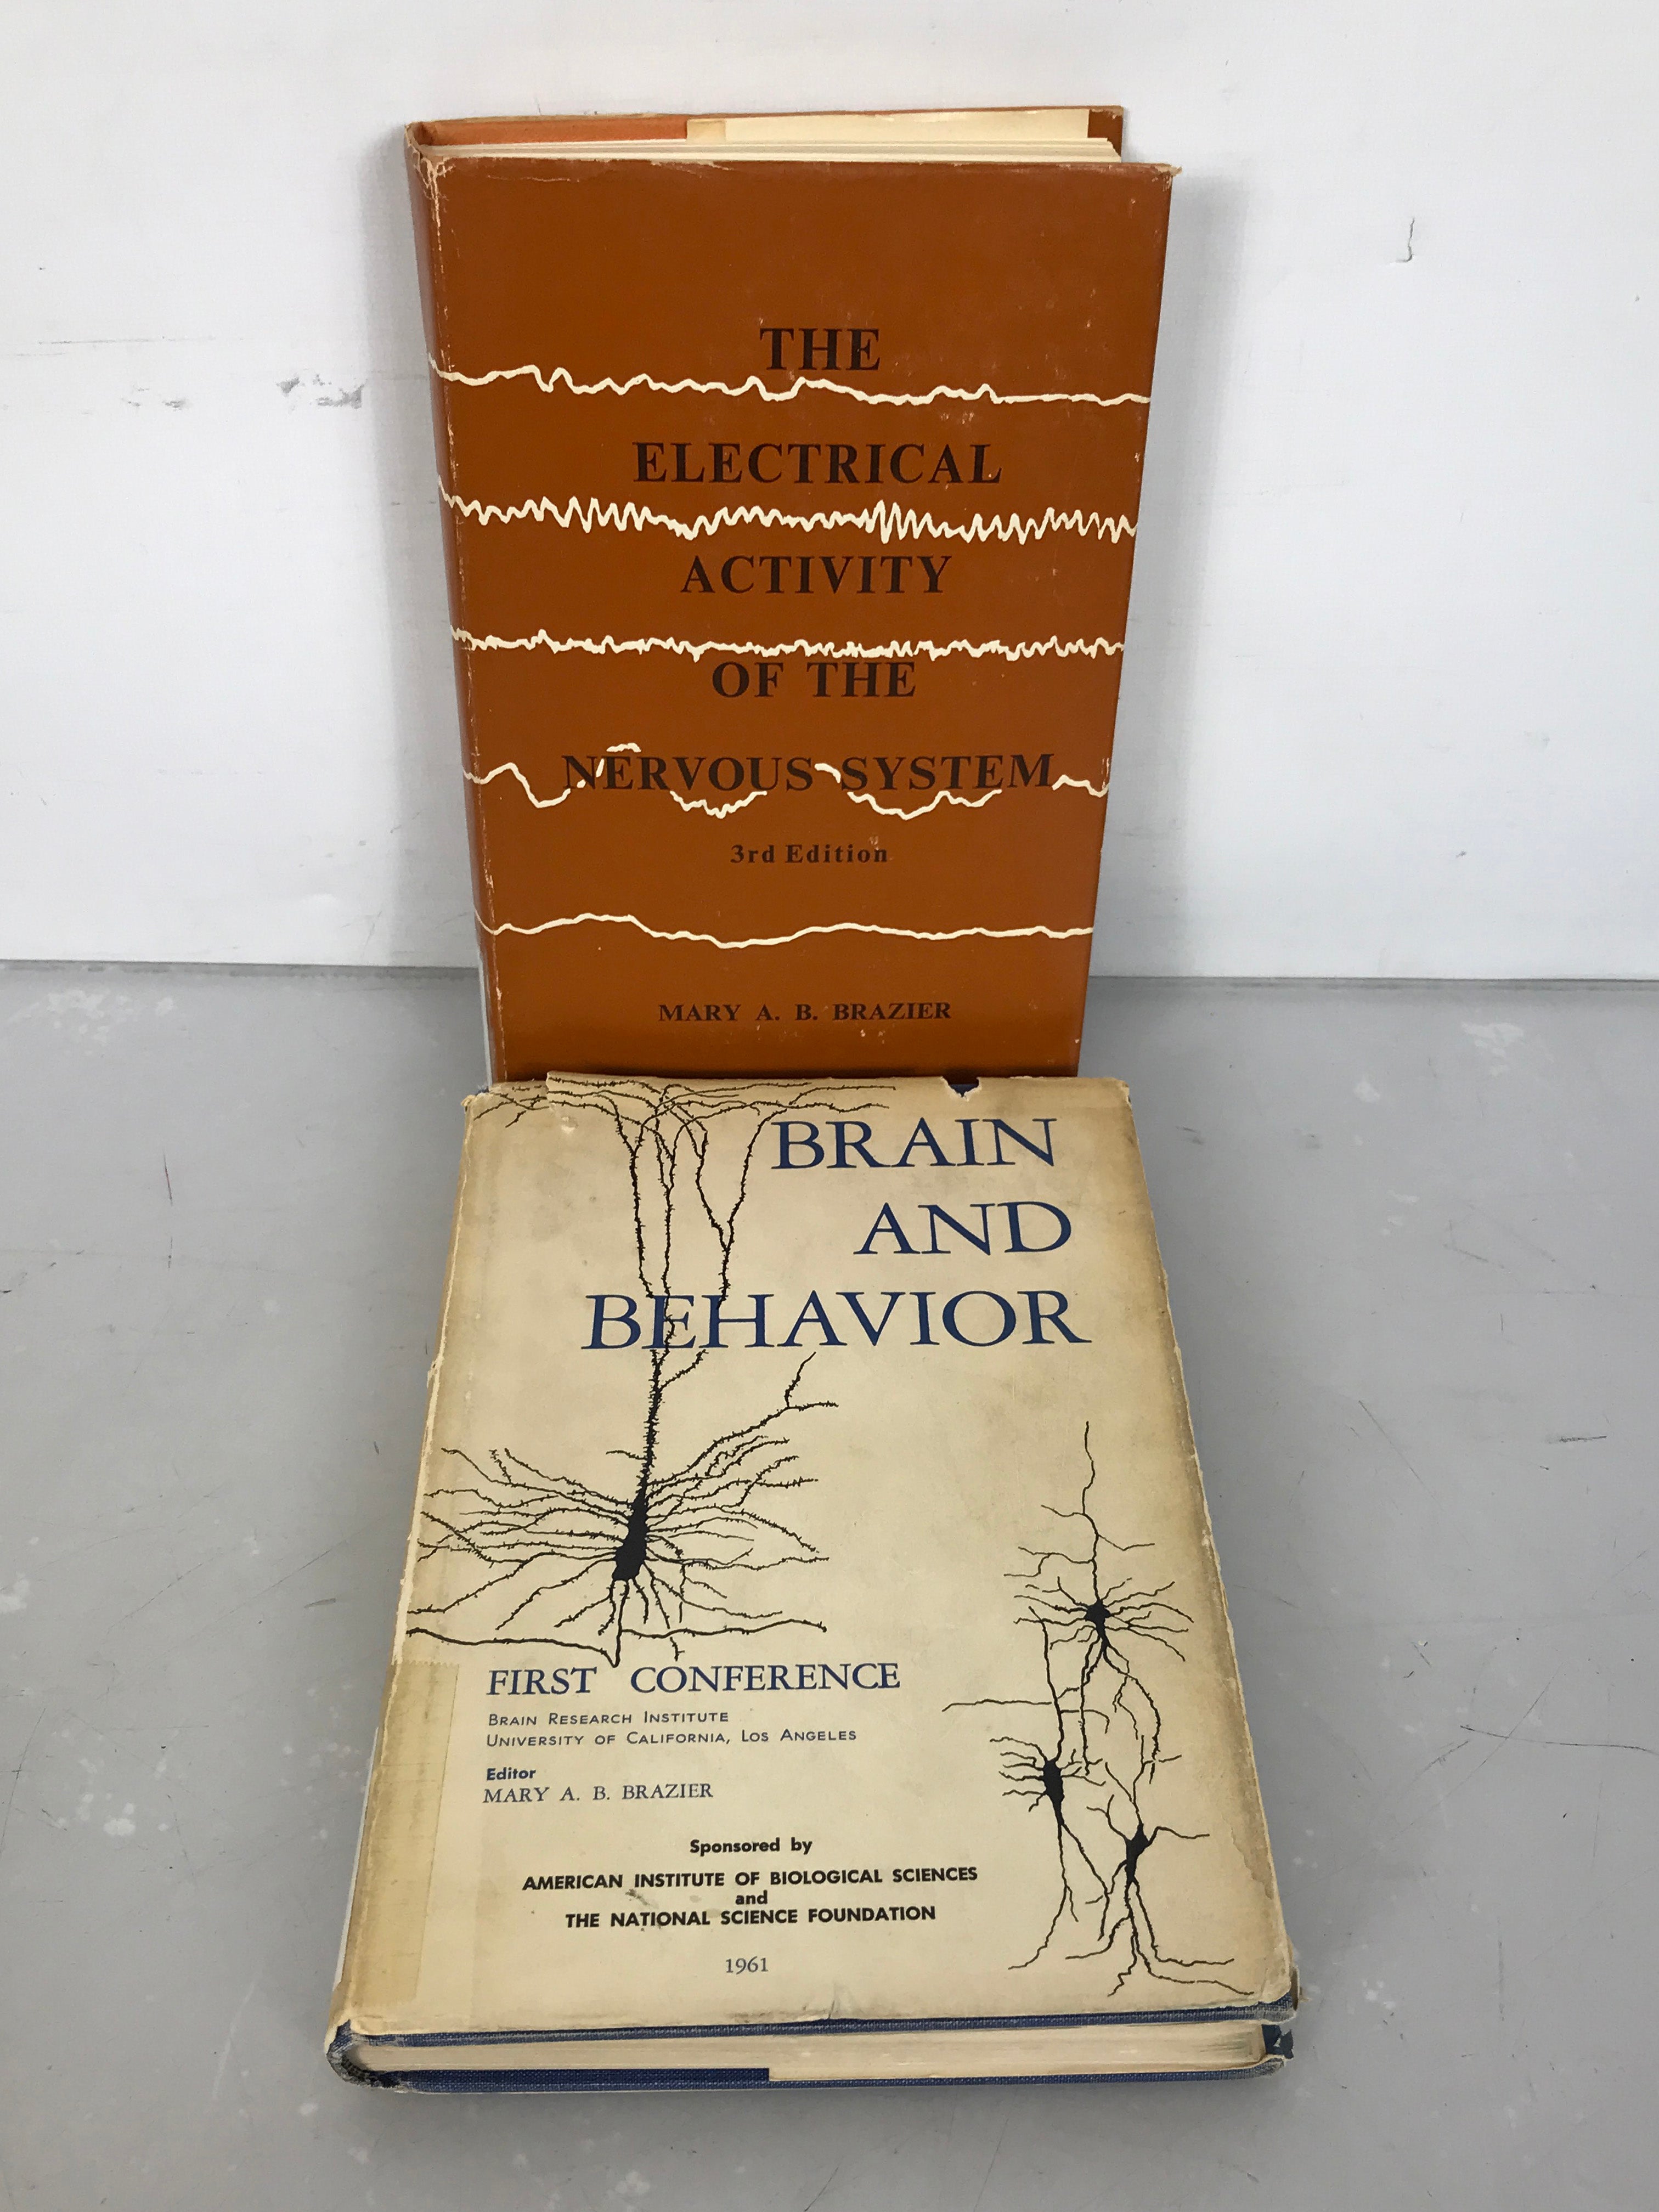 Lot of 2 Mary A.B. Brazier Books: The Electrical Activity of the Nervous System Third Edition (1968) and Brain and Behavior First Conference (1961)  HC DJ